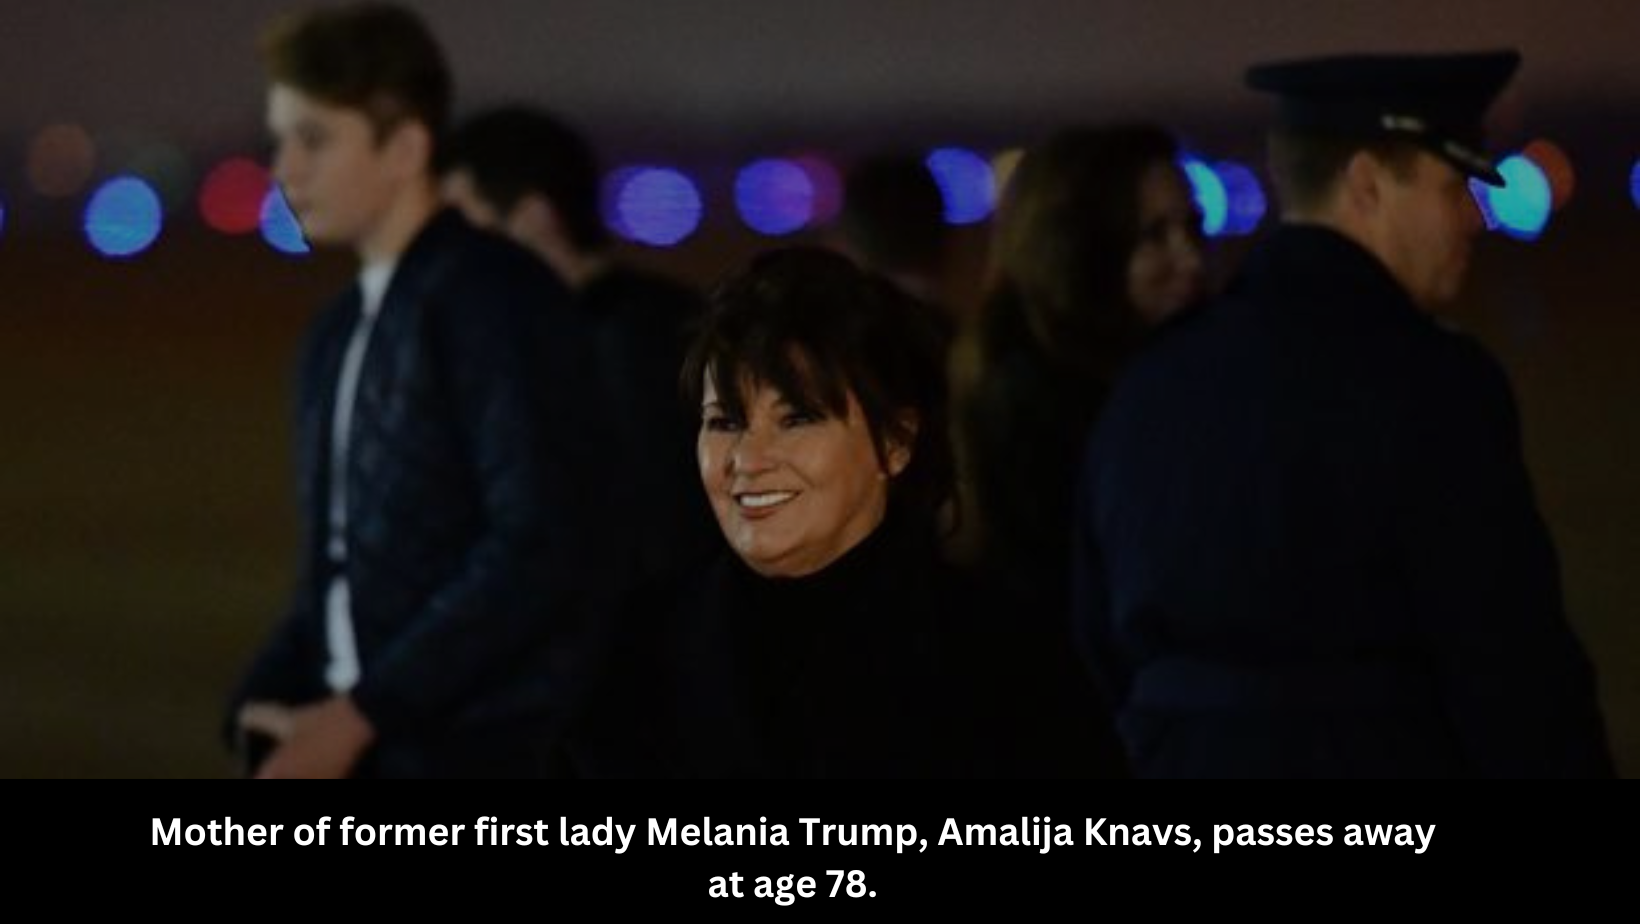 Mother of former first lady Melania Trump, Amalija Knavs, passes away at age 78.